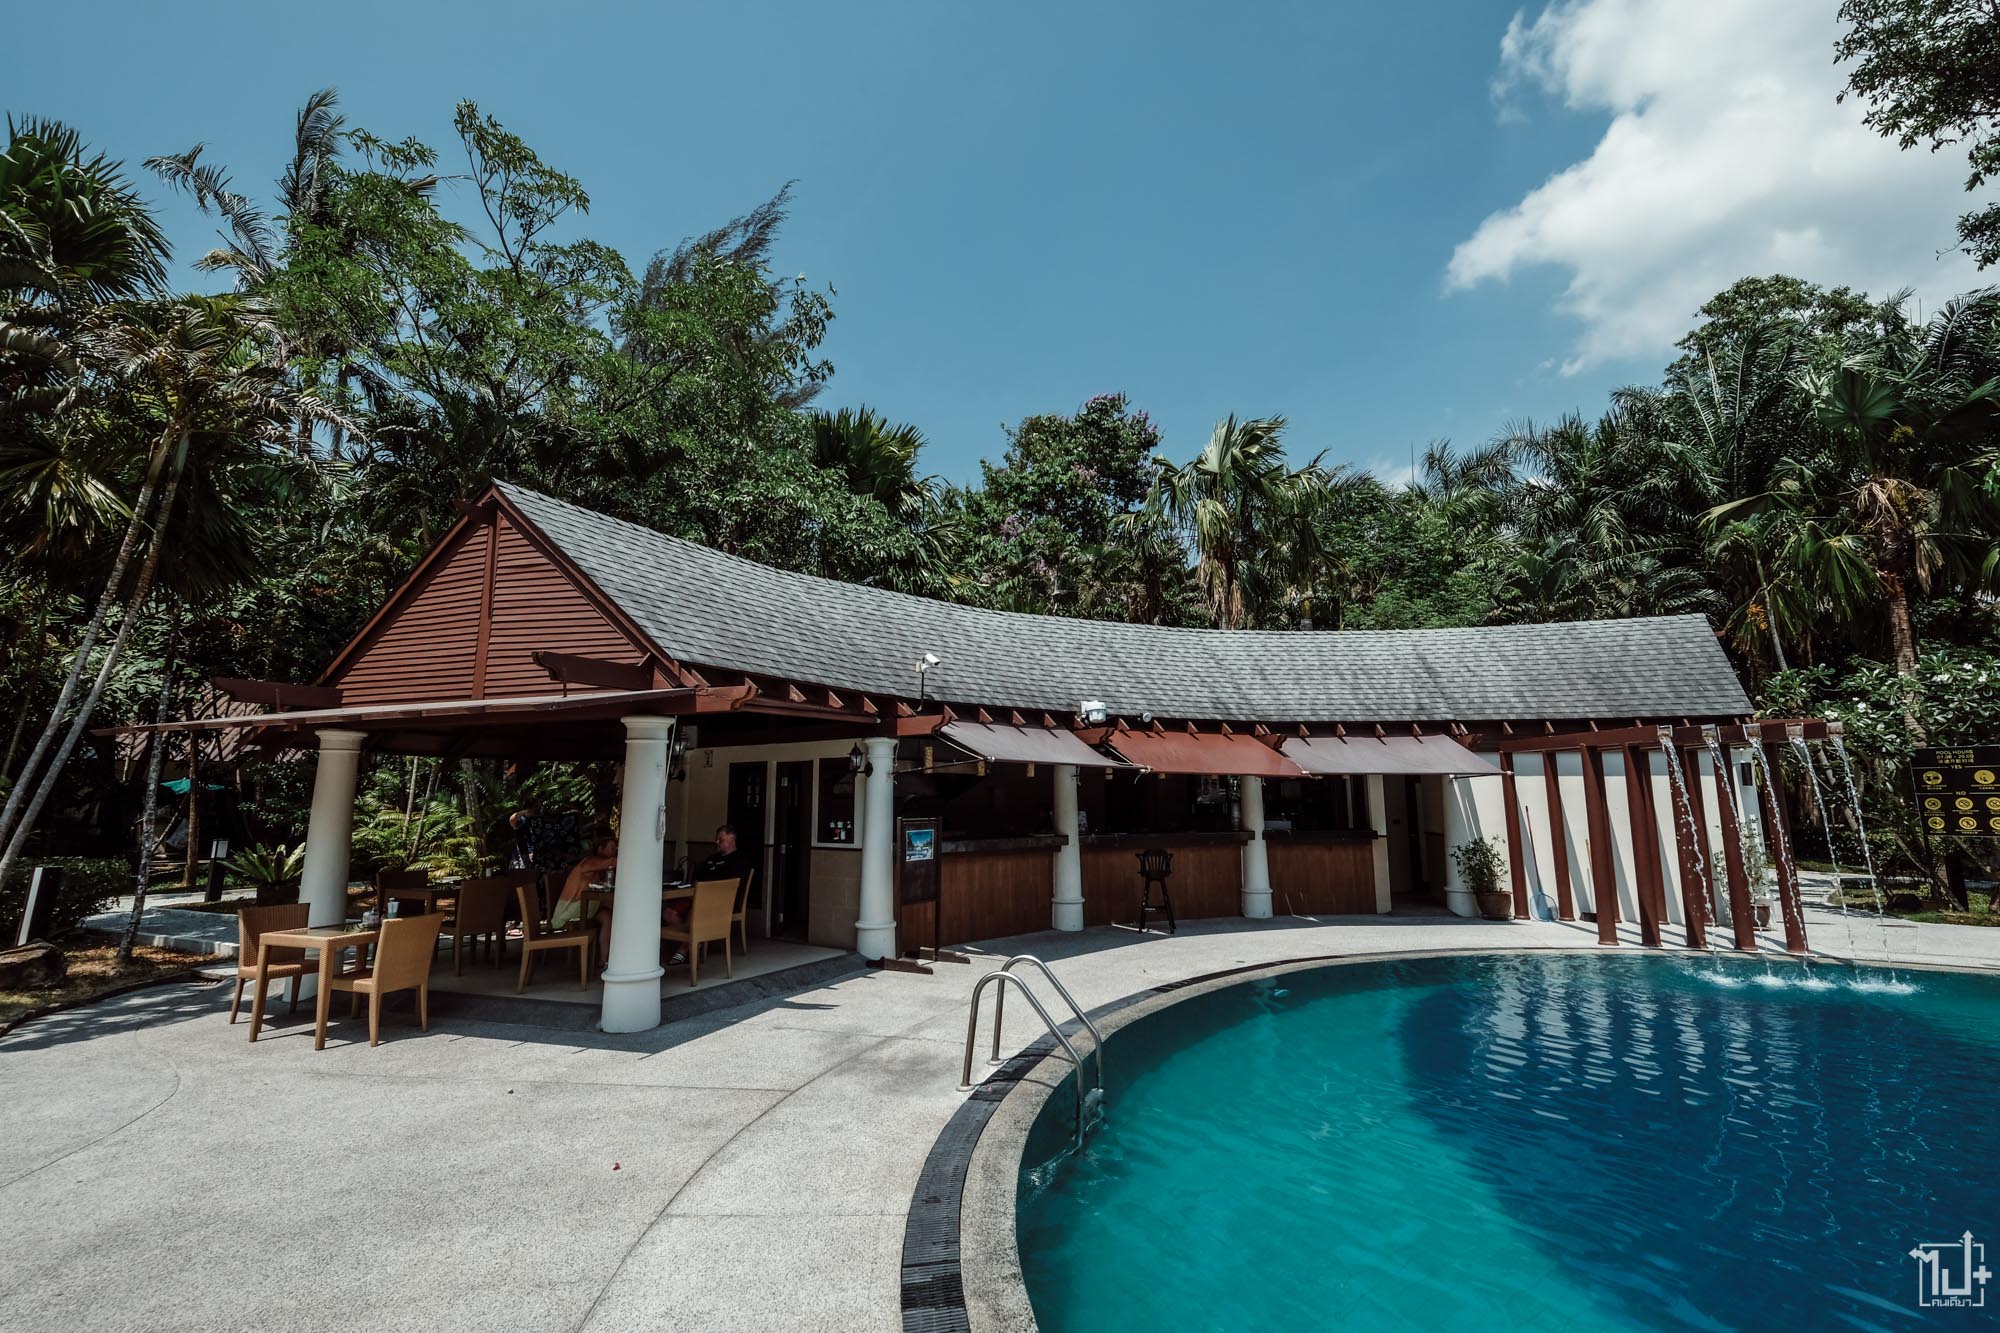 DeevanaPatongResortSpa, DeevanaPatong, Deevana, Patong, DeluxewithJacuzzi, ป่าตอง, ภูเก็ต, ที่พักภูเก็ต, เที่ยวภูเก็ต, ที่พักป่าตอง